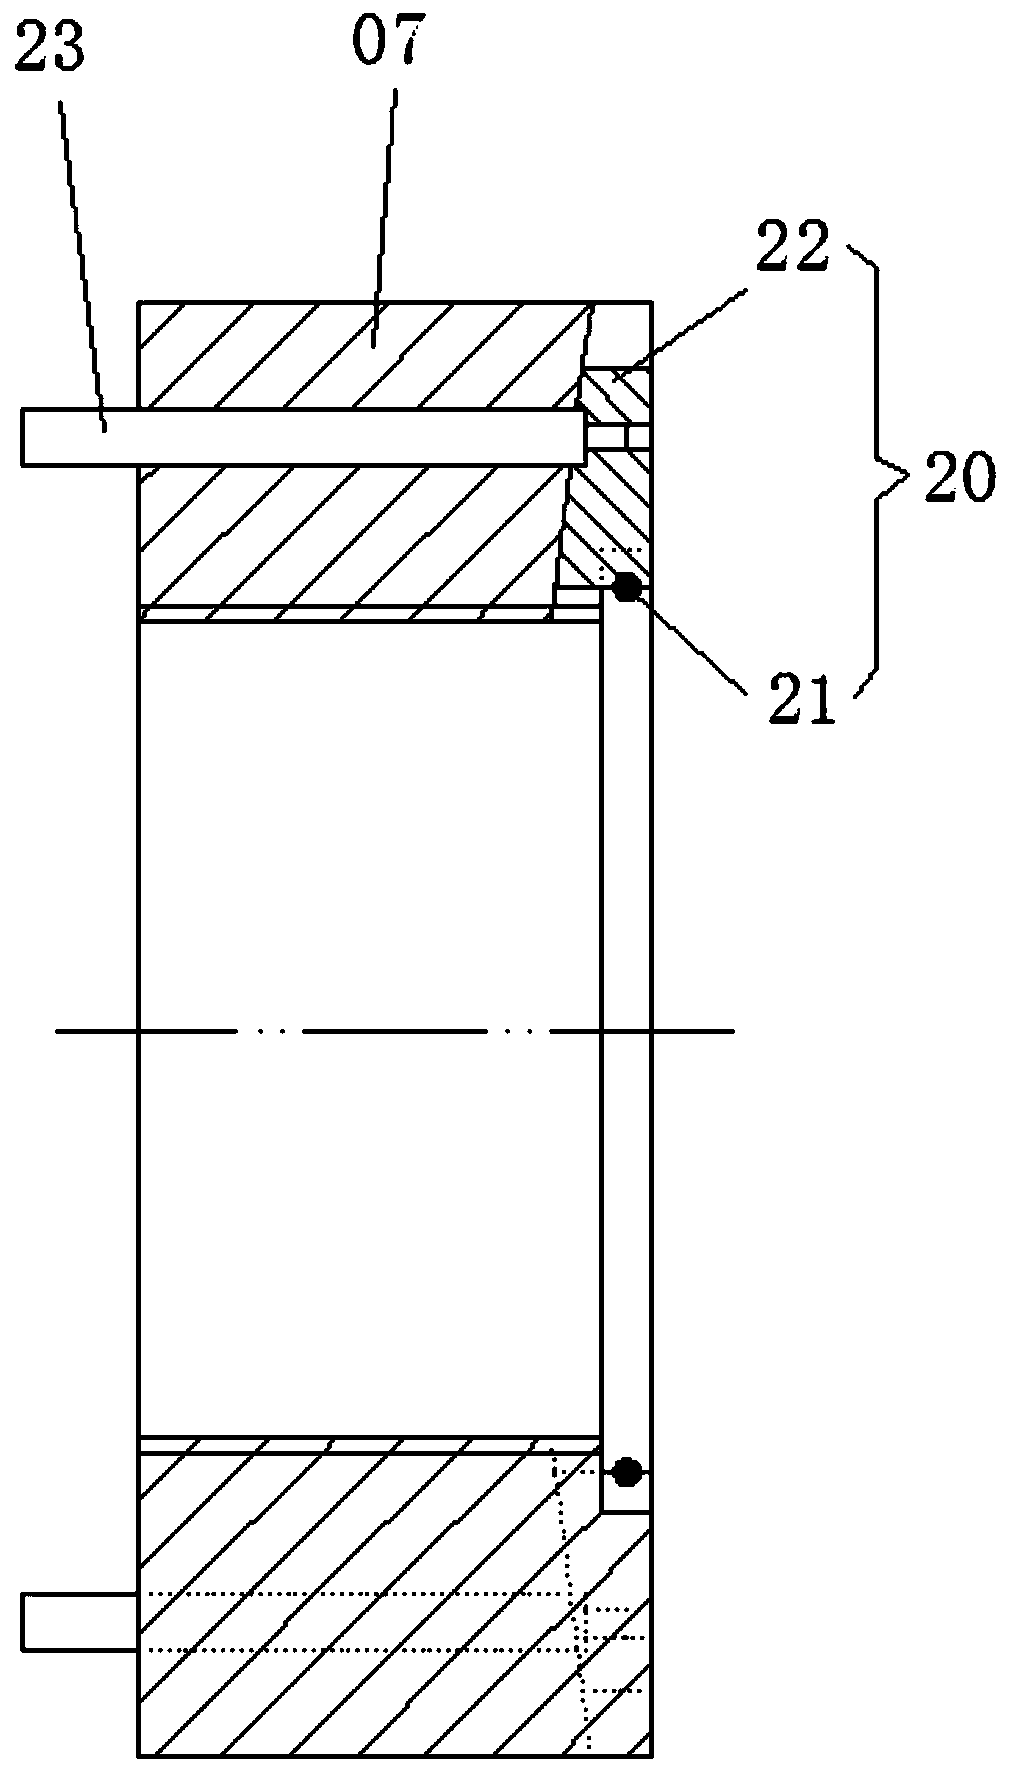 High-pressure hydrogen storage container with sealing structures at two ends